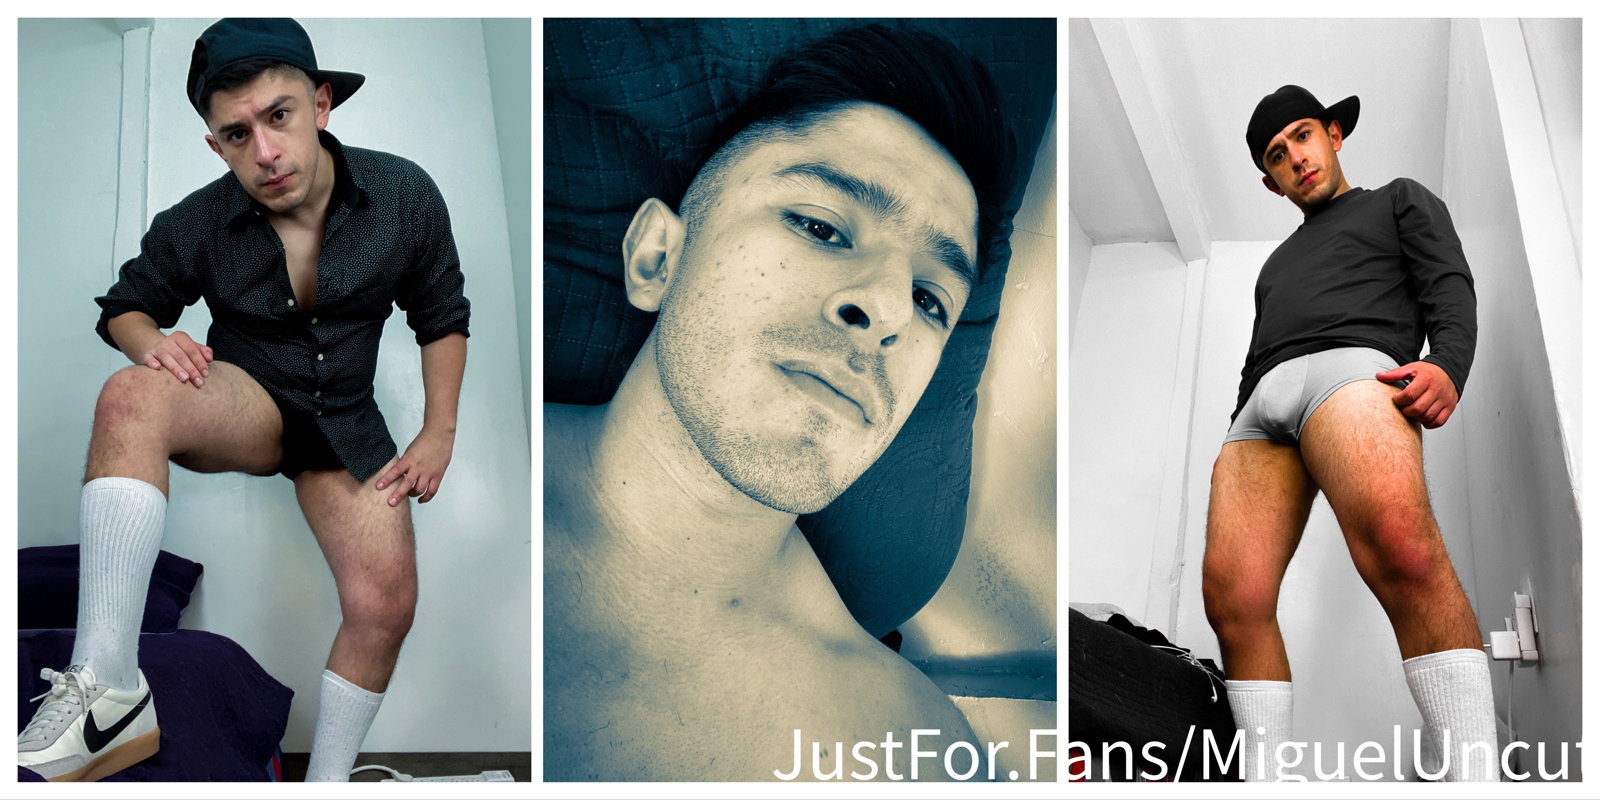 Photo by migueluncut with the username @migueluncut, who is a star user,  June 10, 2020 at 1:19 AM. The post is about the topic Gay and the text says '#NSFW #gayporn #gayvideos #gaylatino #justforfans #bigcock

https://my.bio/migueluncutt

https://justfor.fans/MiguelUncut'